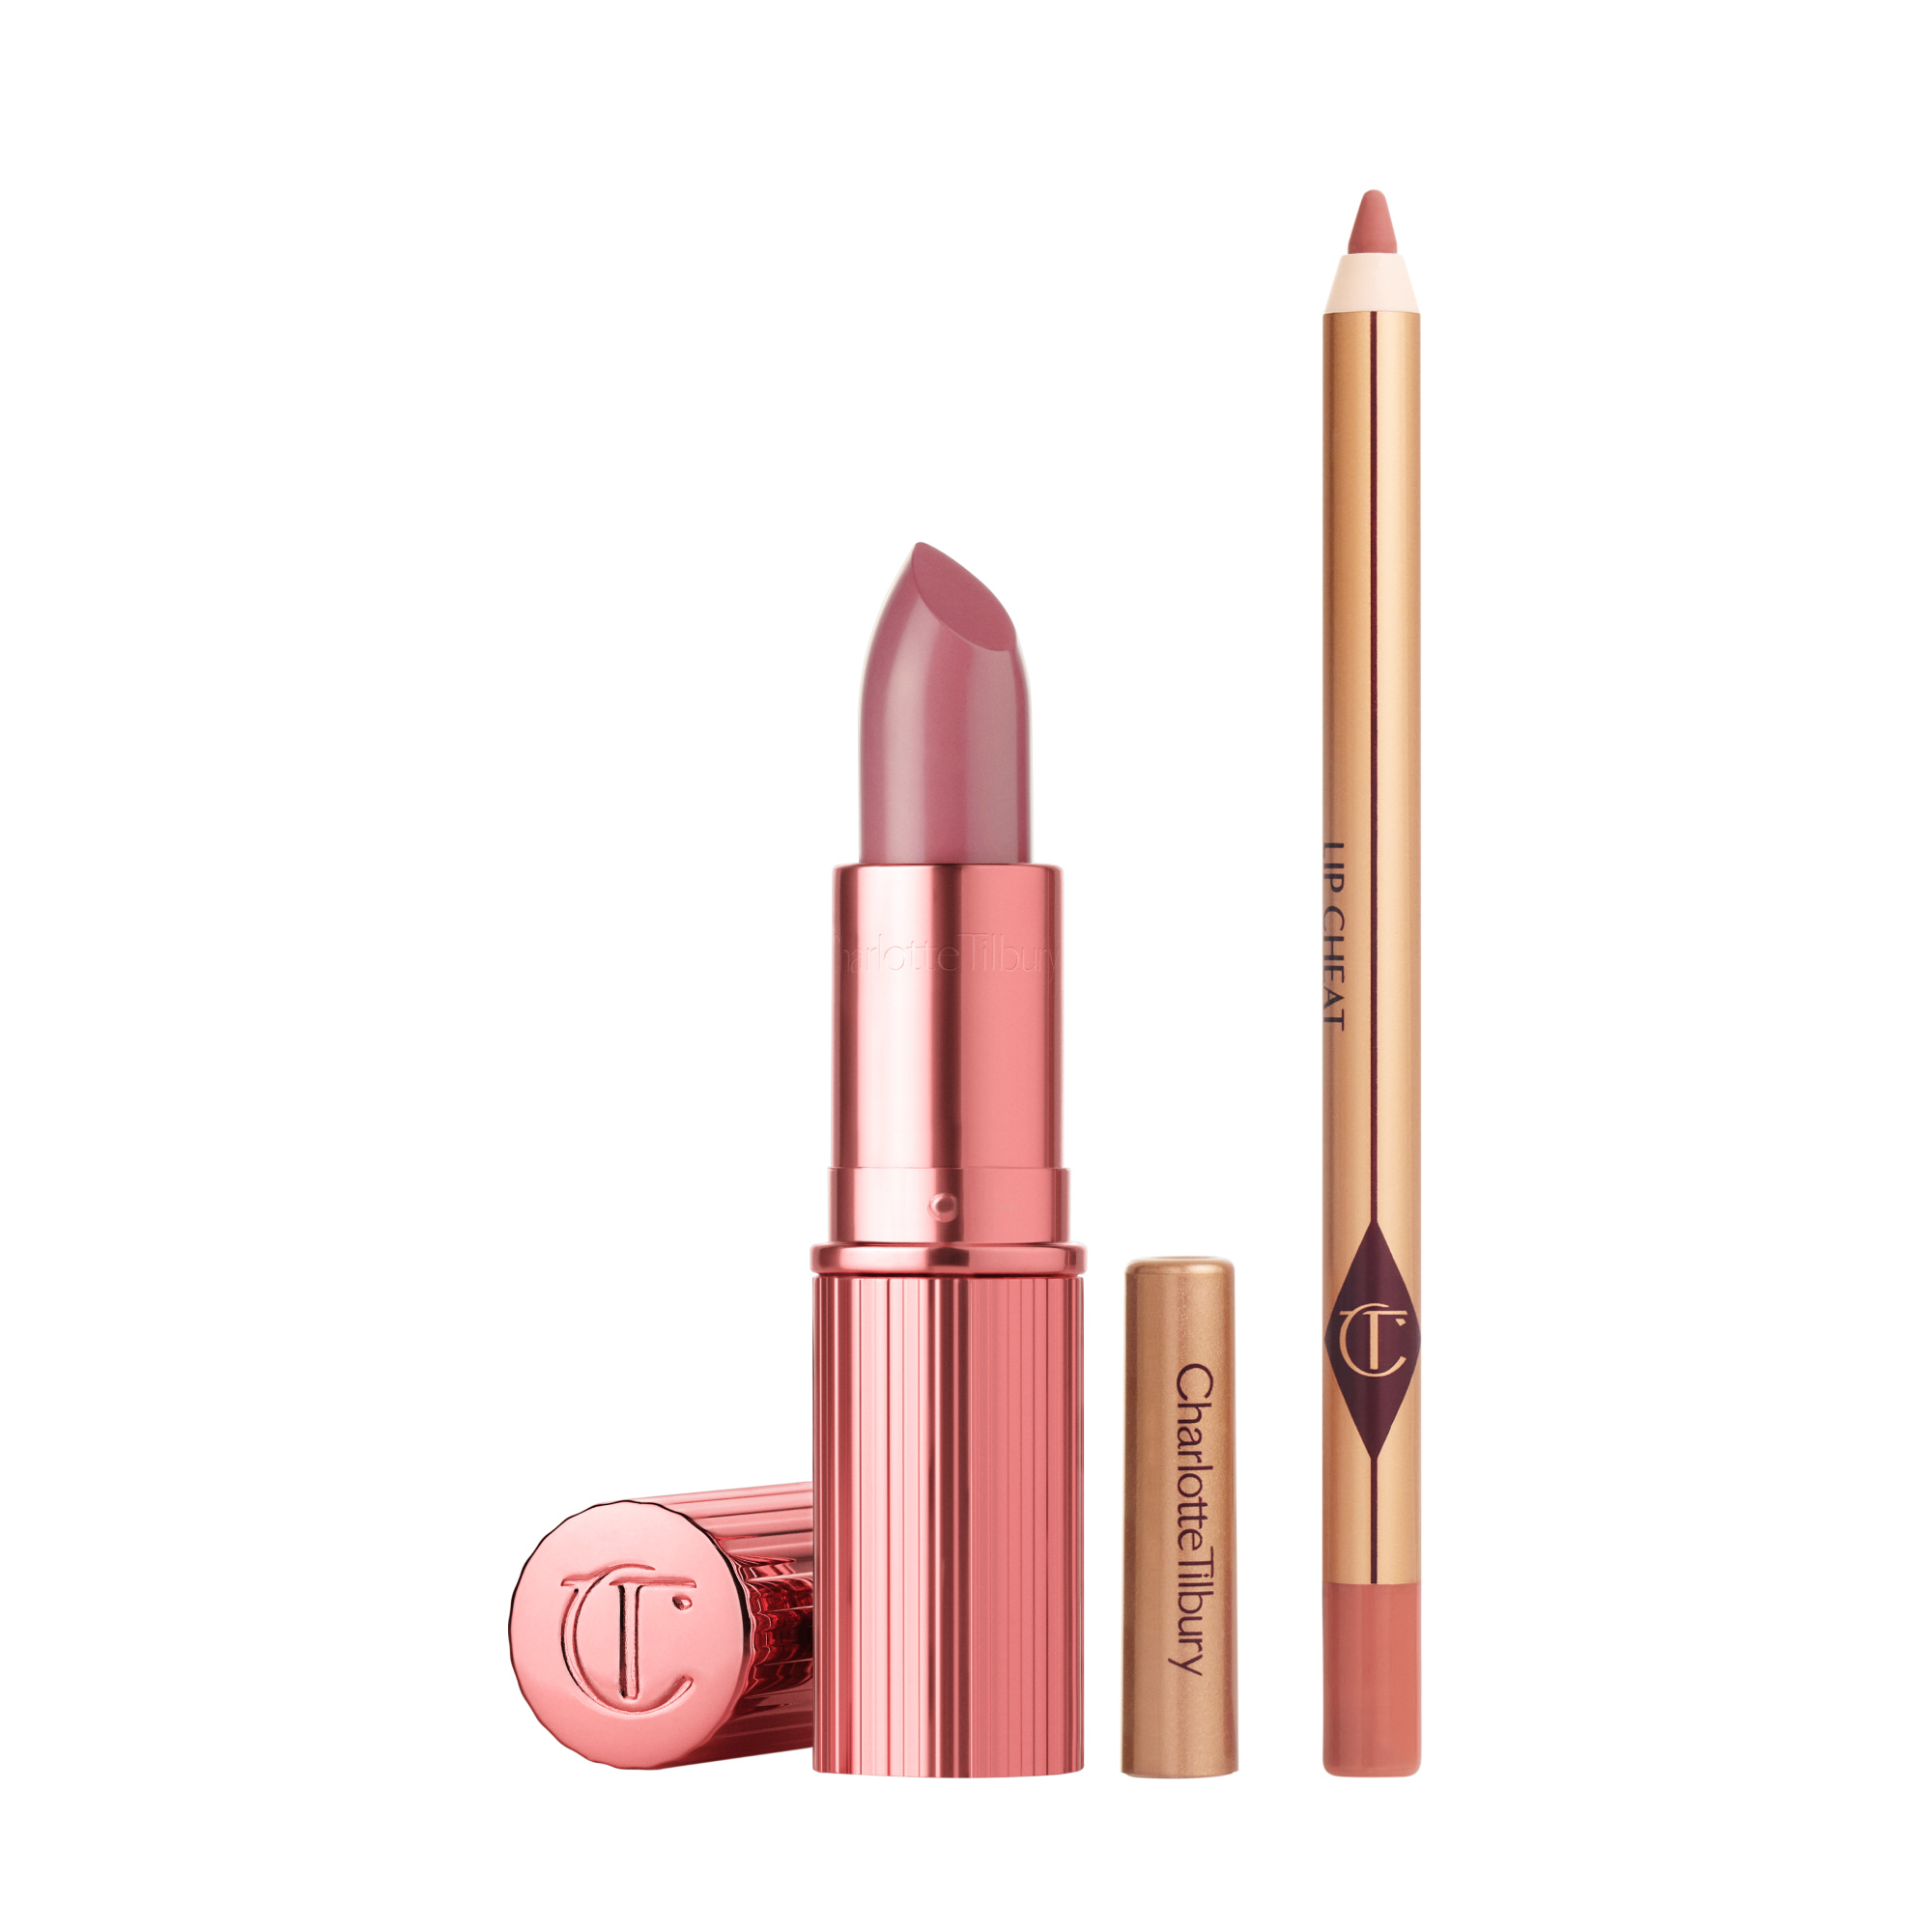 Can Charlotte Tilbury Beauty convince customers to download an app?